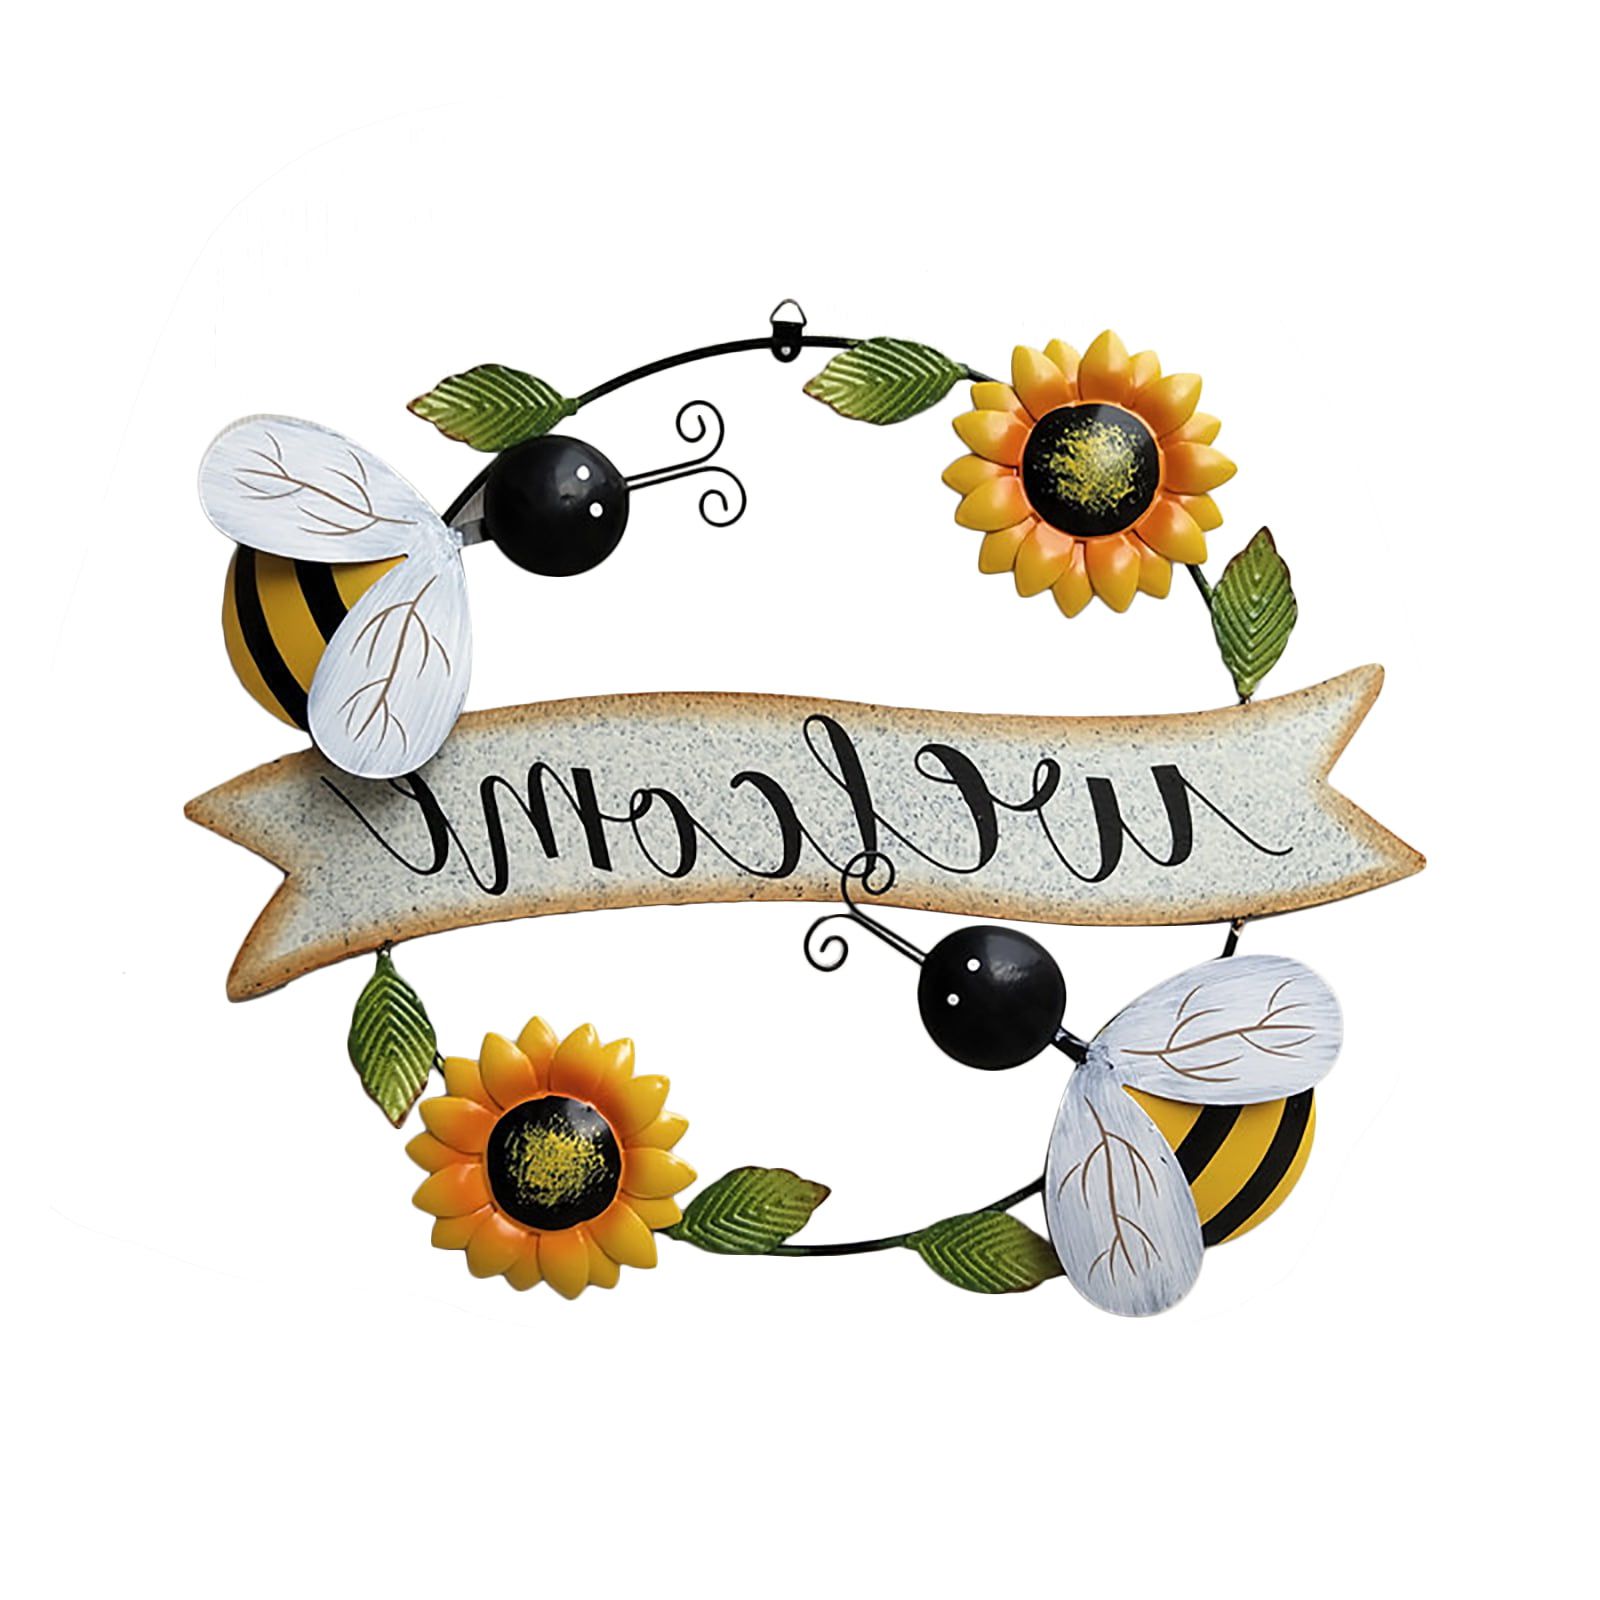 Sunflower Welcome Sign Decorative Vintage Metal Wall Hanging Home Garden  Decor – Welcome Plaque For Front Door, Garden Themed Sunflower & Butterfly  – Walmart Within Most Recently Released Vintage Metal Welcome Sign Wall Art (View 7 of 15)